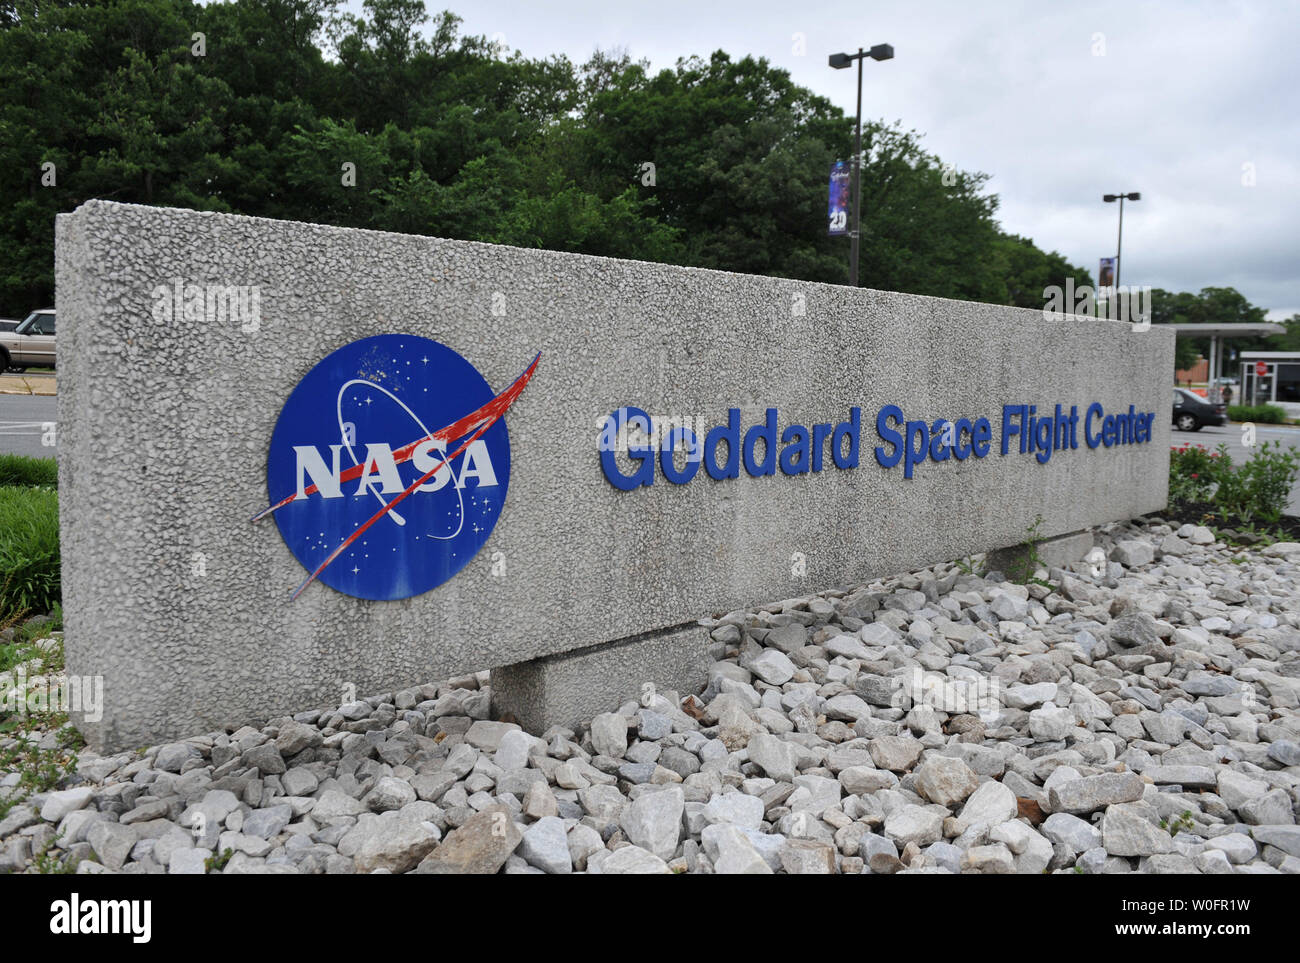 The main entrance is seen at the NASA Goddard Space Flight Center in Greenbelt, Maryland on May 24, 2010.     UPI/Kevin Dietsch Stock Photo